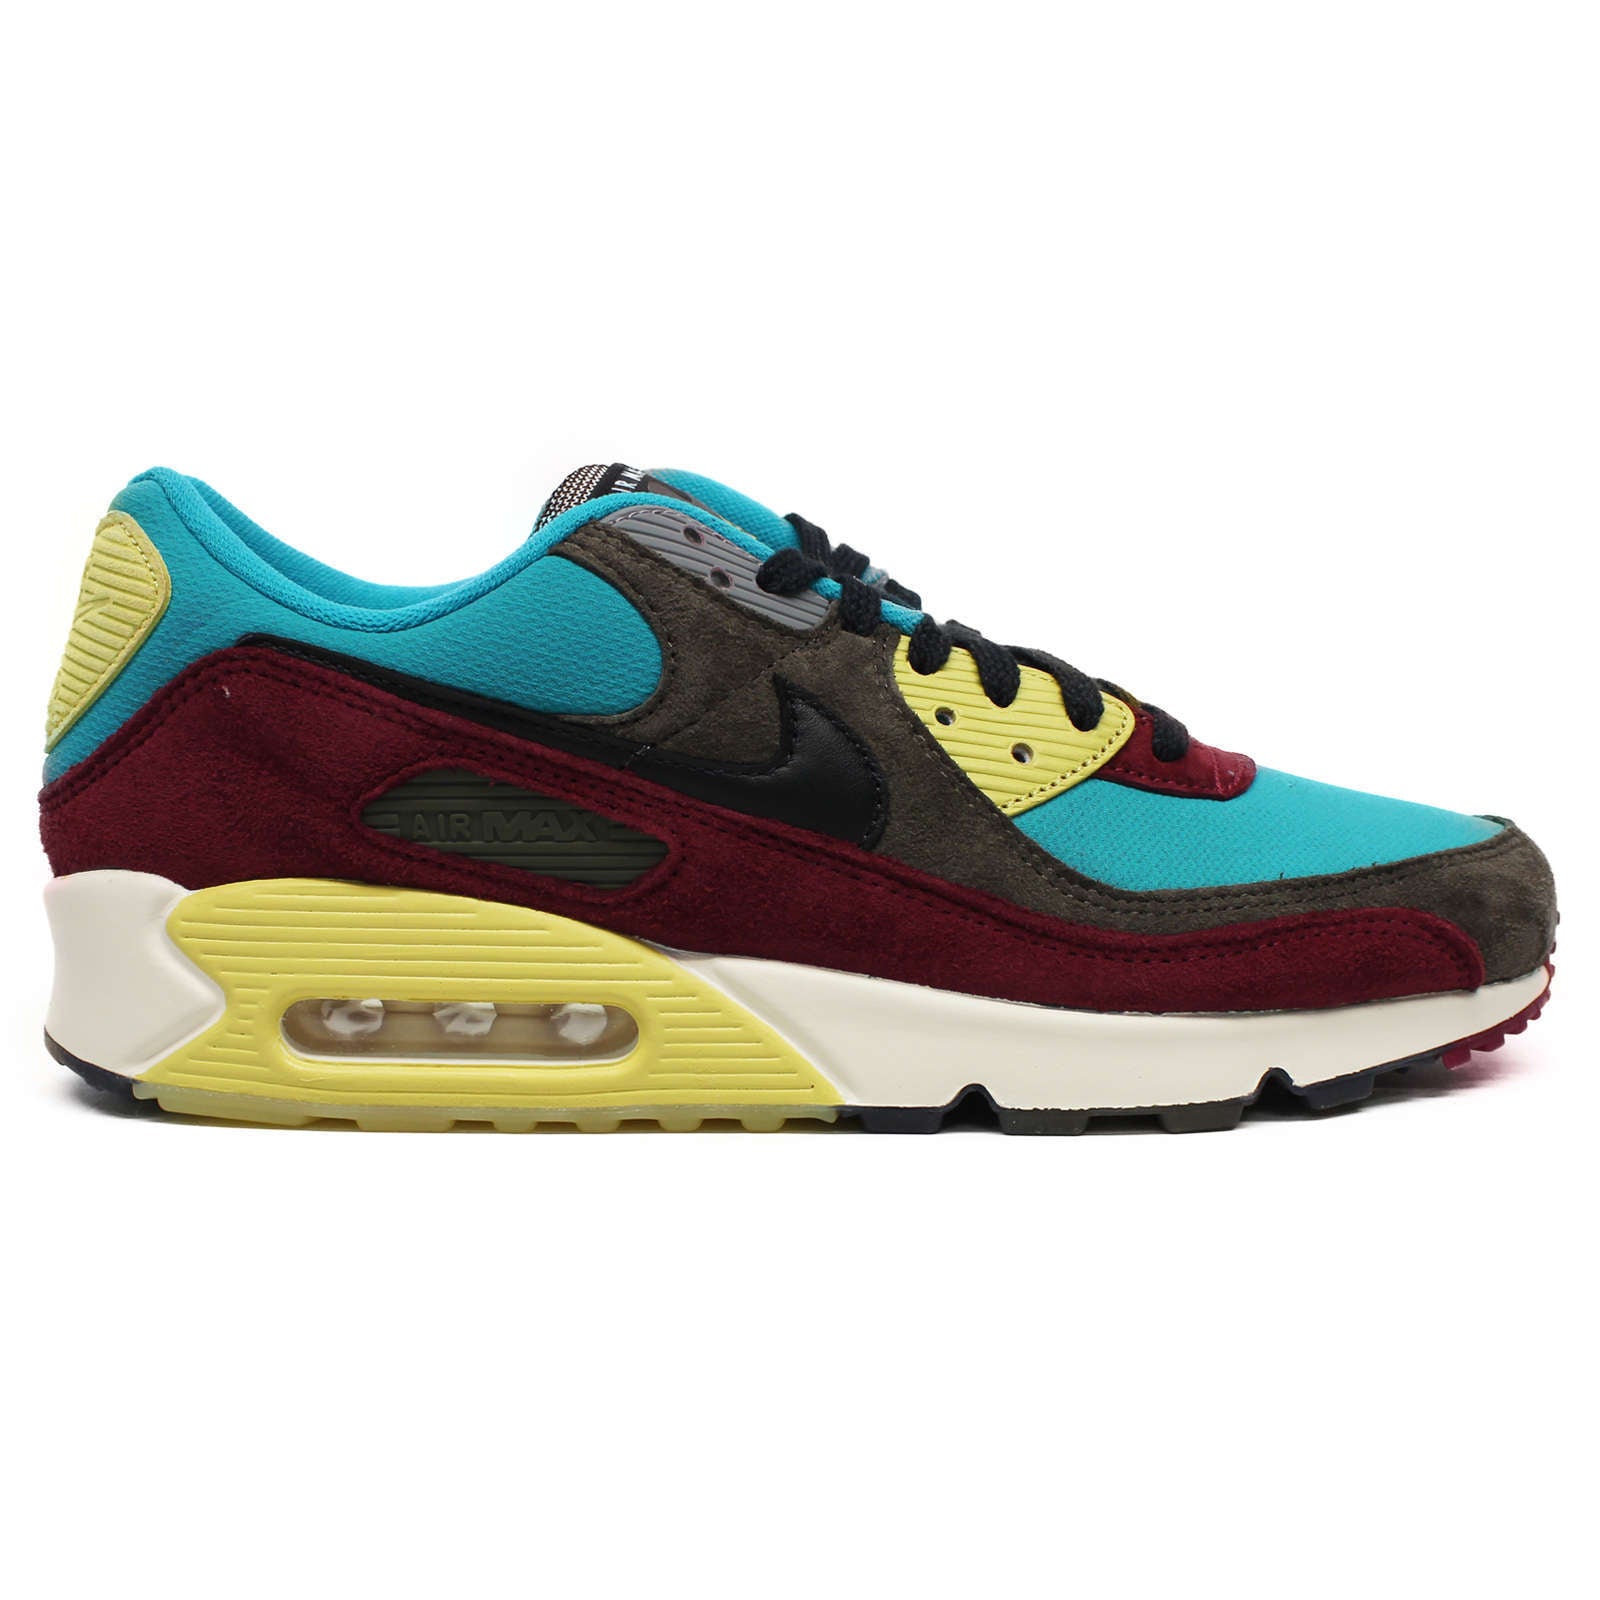 Nike Air Max 90 NRG Suede Leather Unisex Low-Top Trainers#color_ridgerock black turbo green